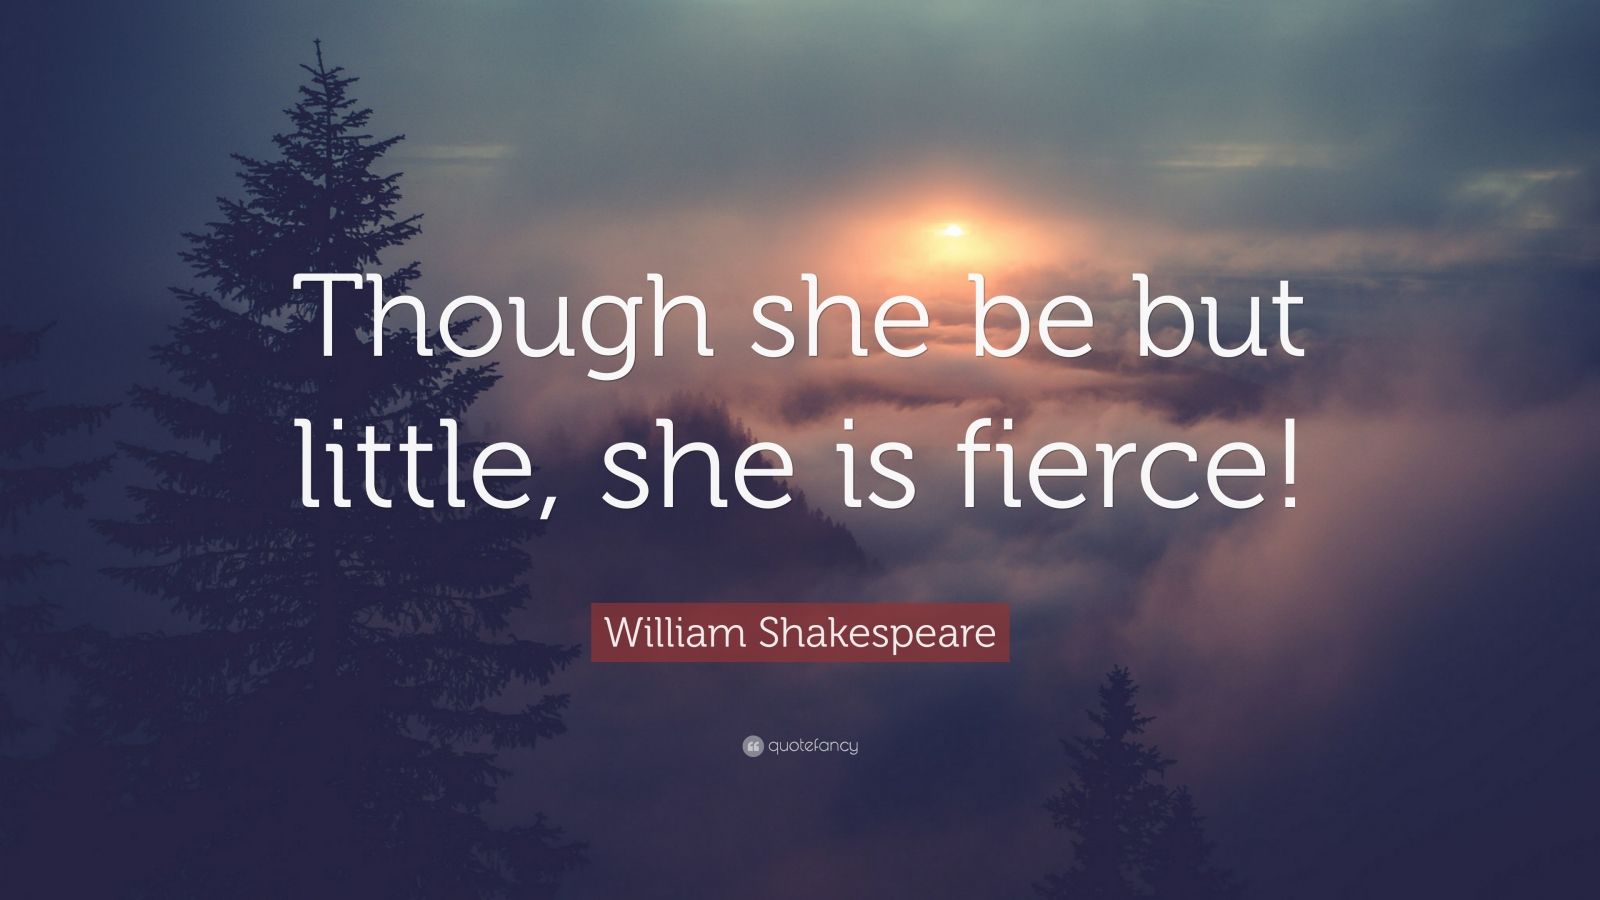 william-shakespeare-quote-though-she-be-but-little-she-is-fierce